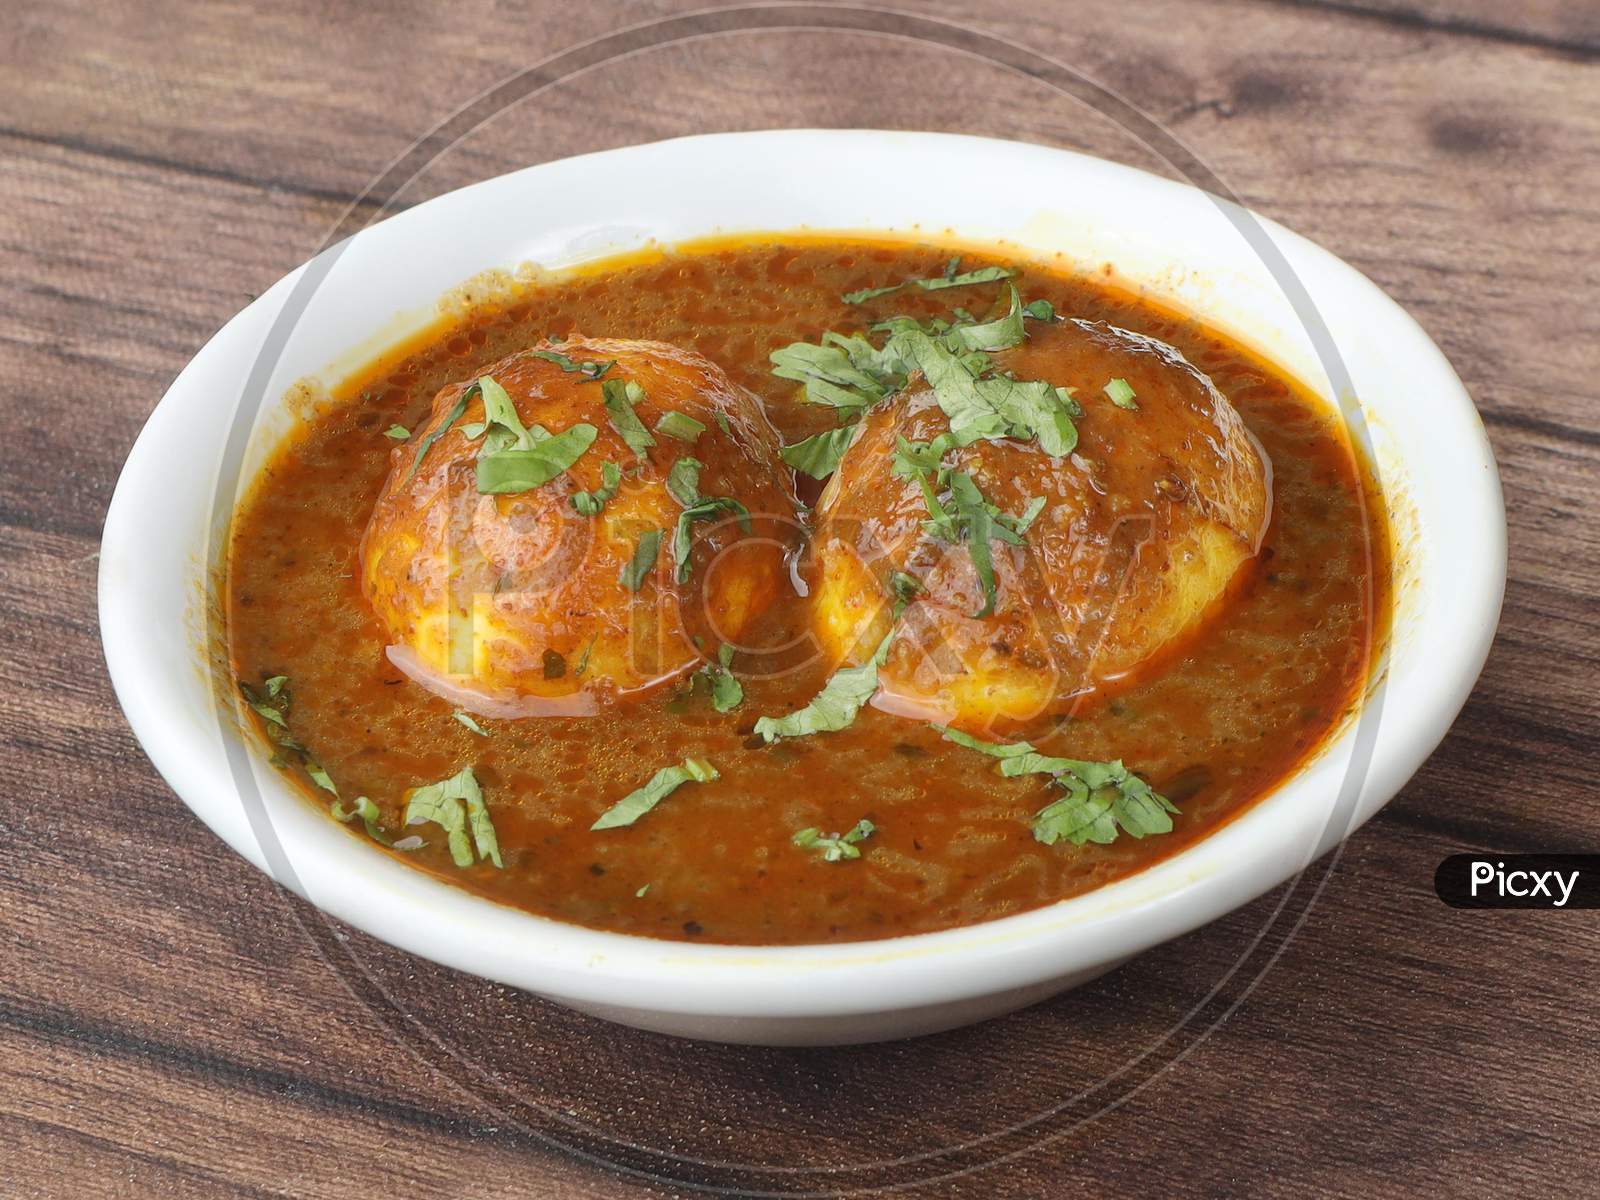 Anda Masala Or Egg Curry Is Popular Indian Spicy Food, Served In A Ceramic Bowl Over Rustic Wooden Background. Selective Focus